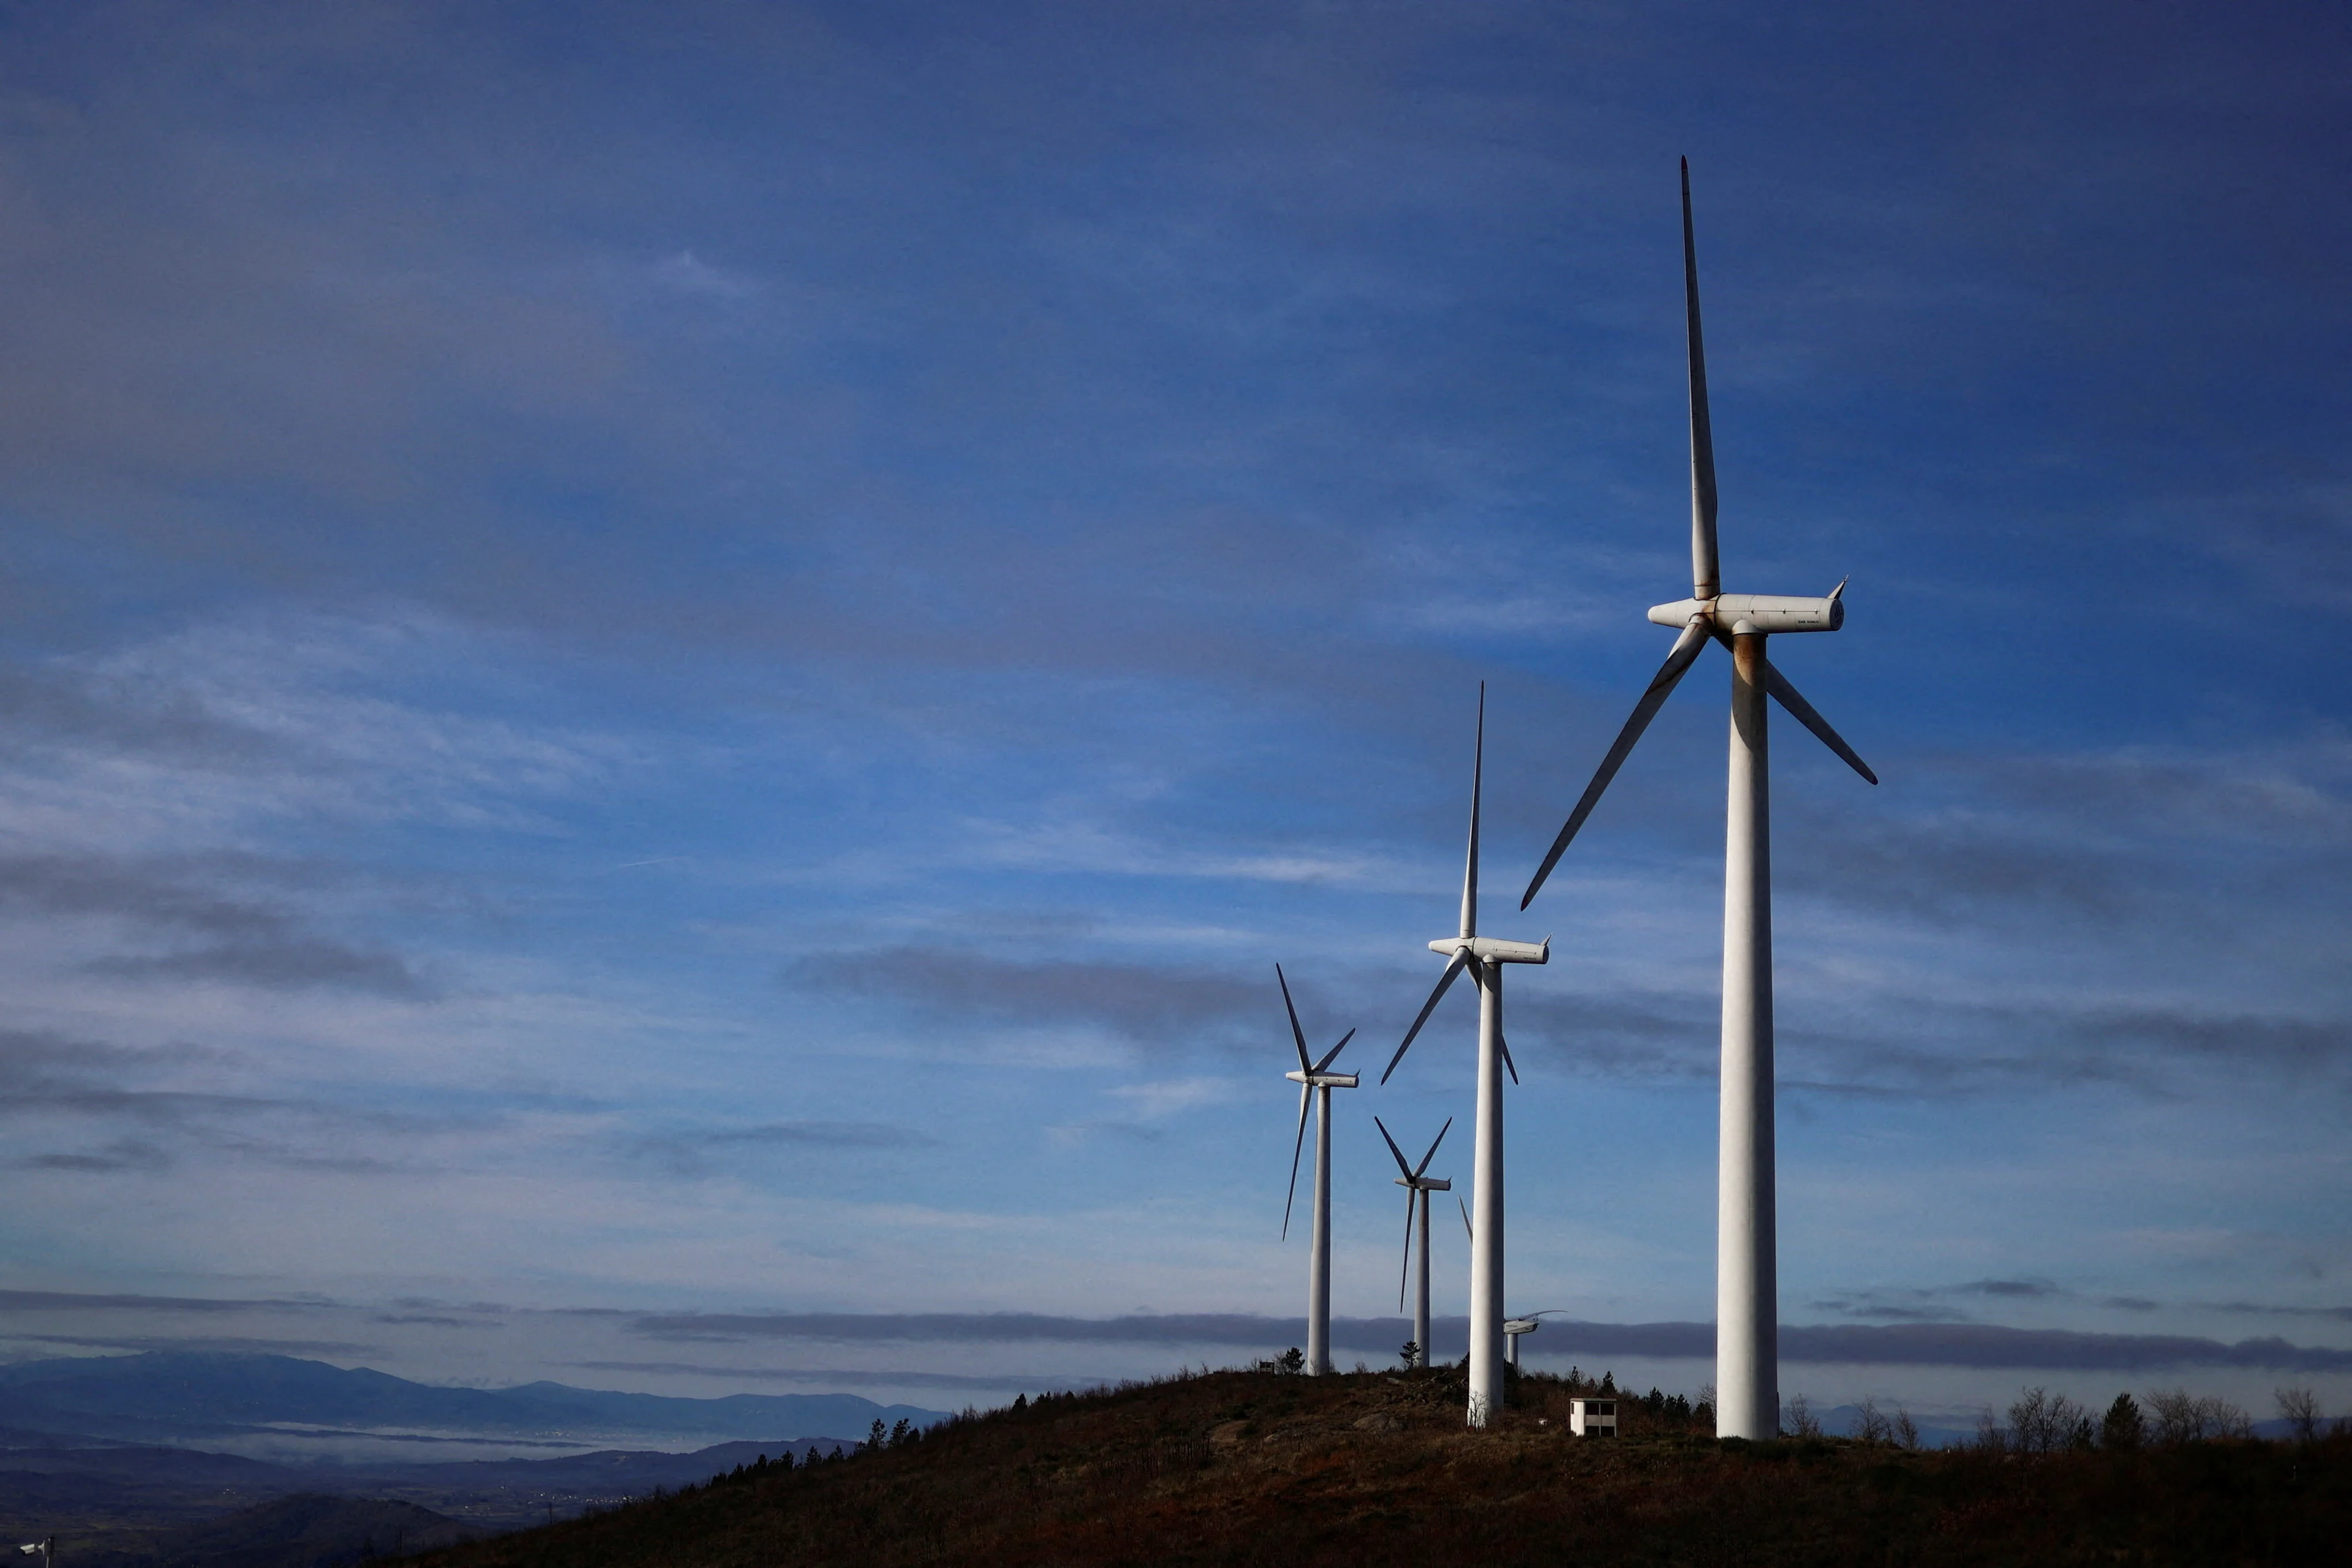 New global renewables capacity additions to rise by a third this year, says IEA